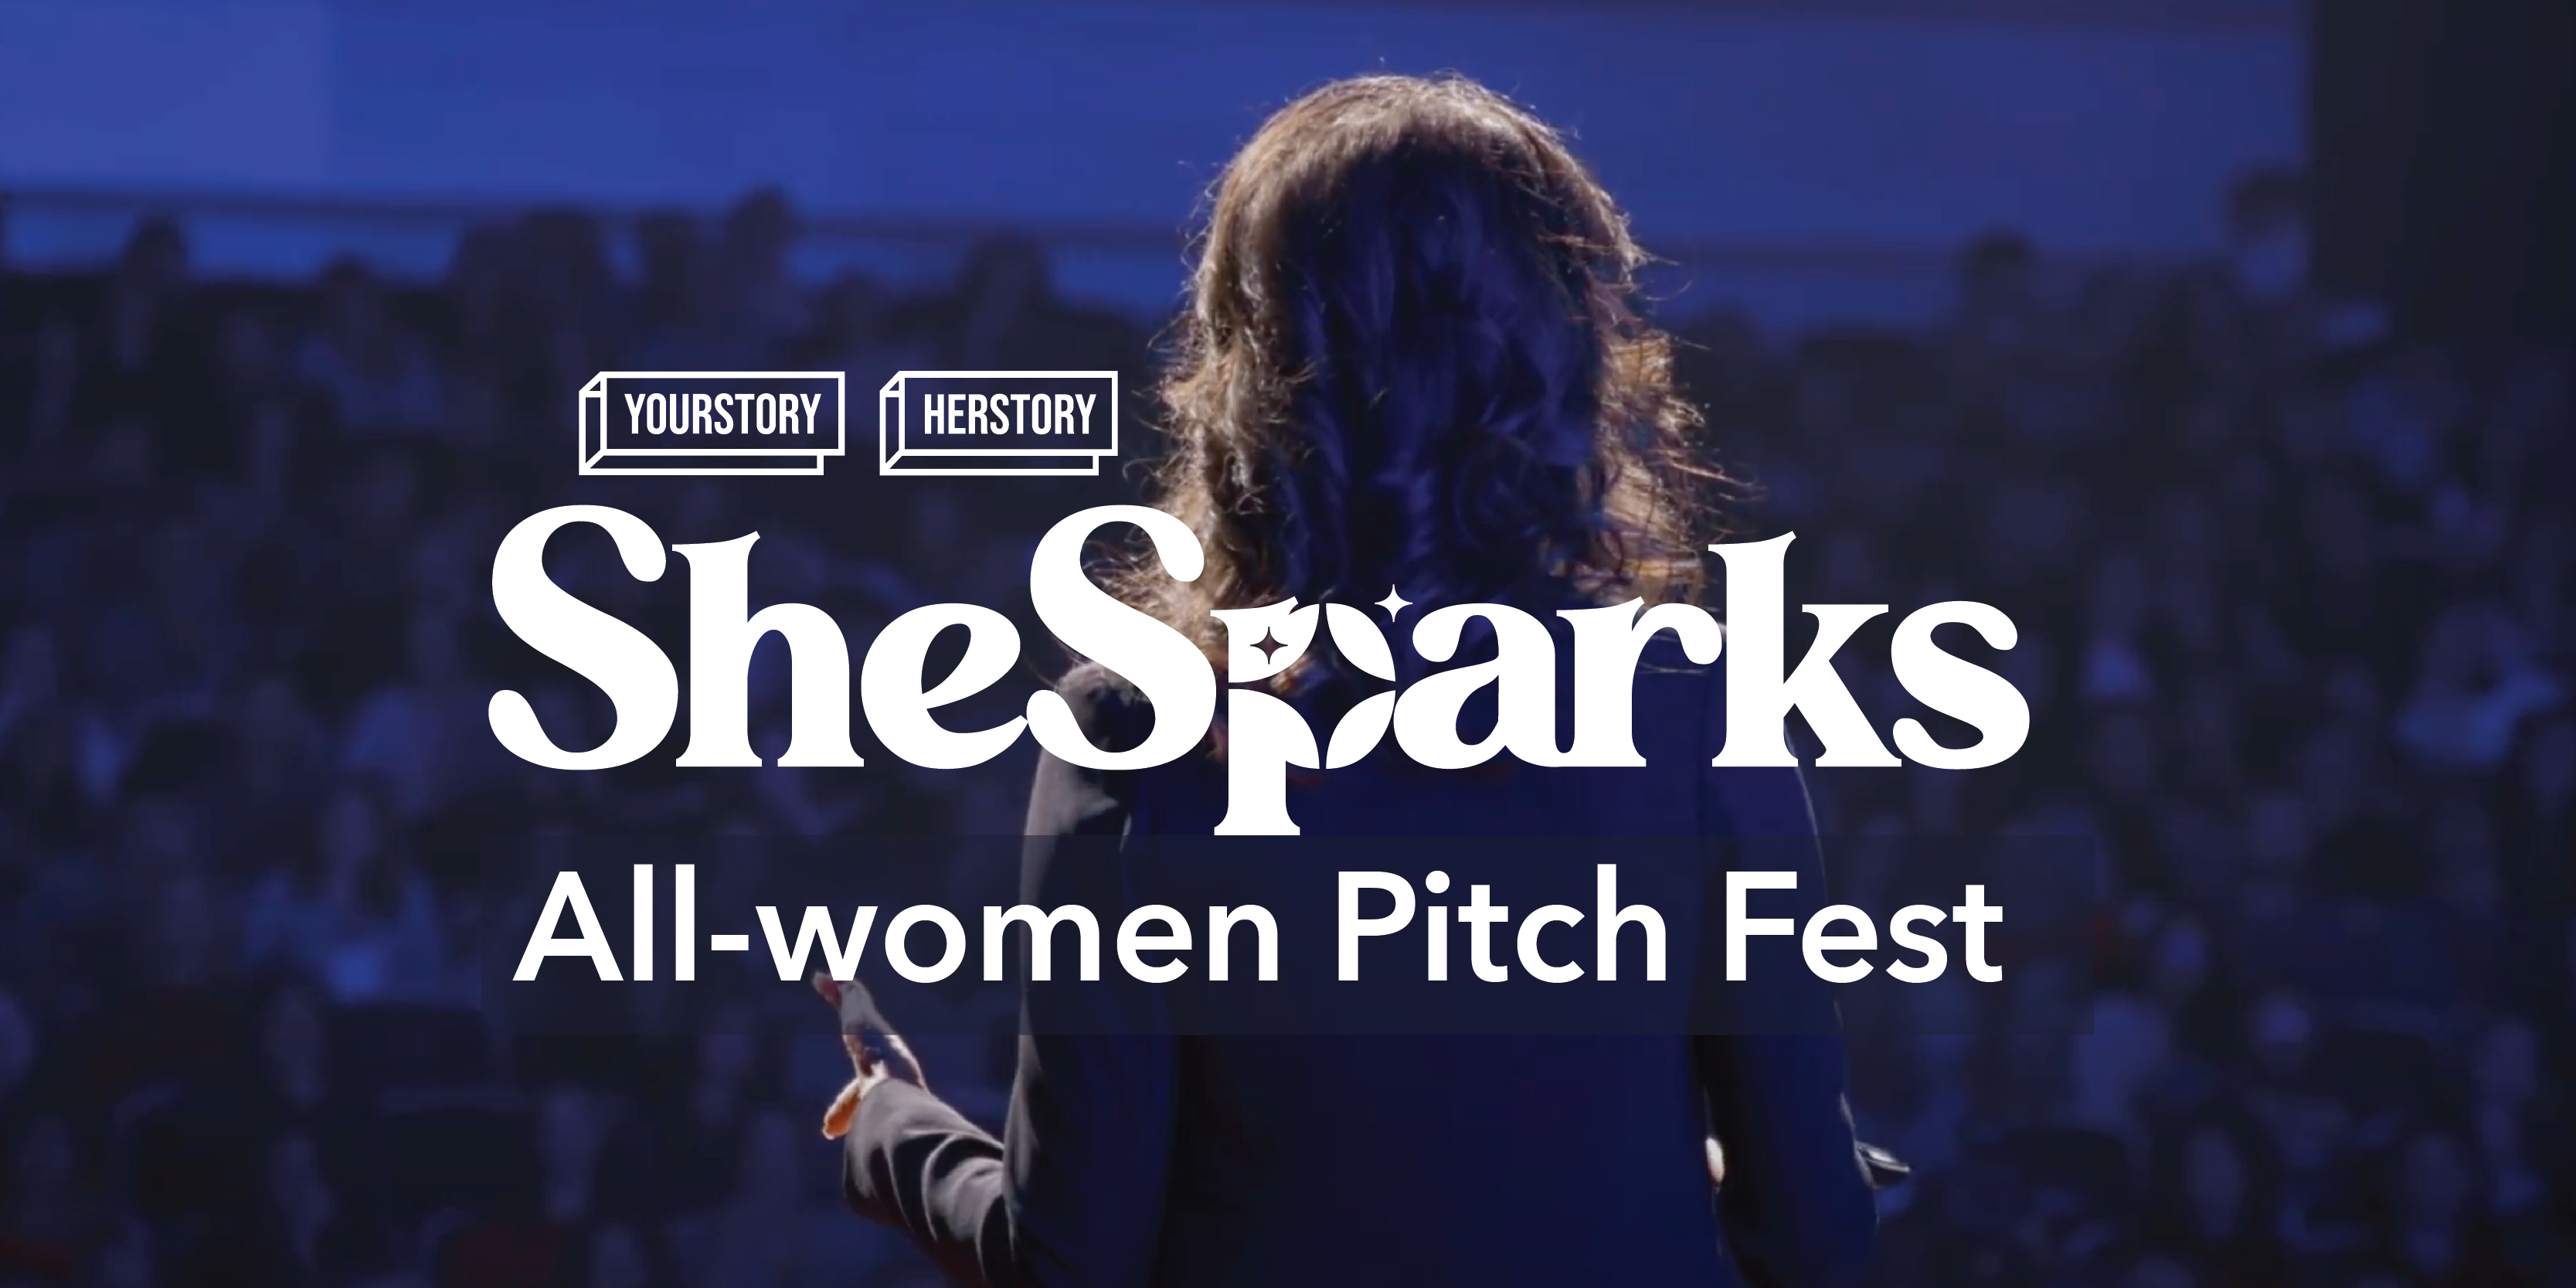 The SheSparks All-women Pitch Fest with an all-women jury is open for applications

